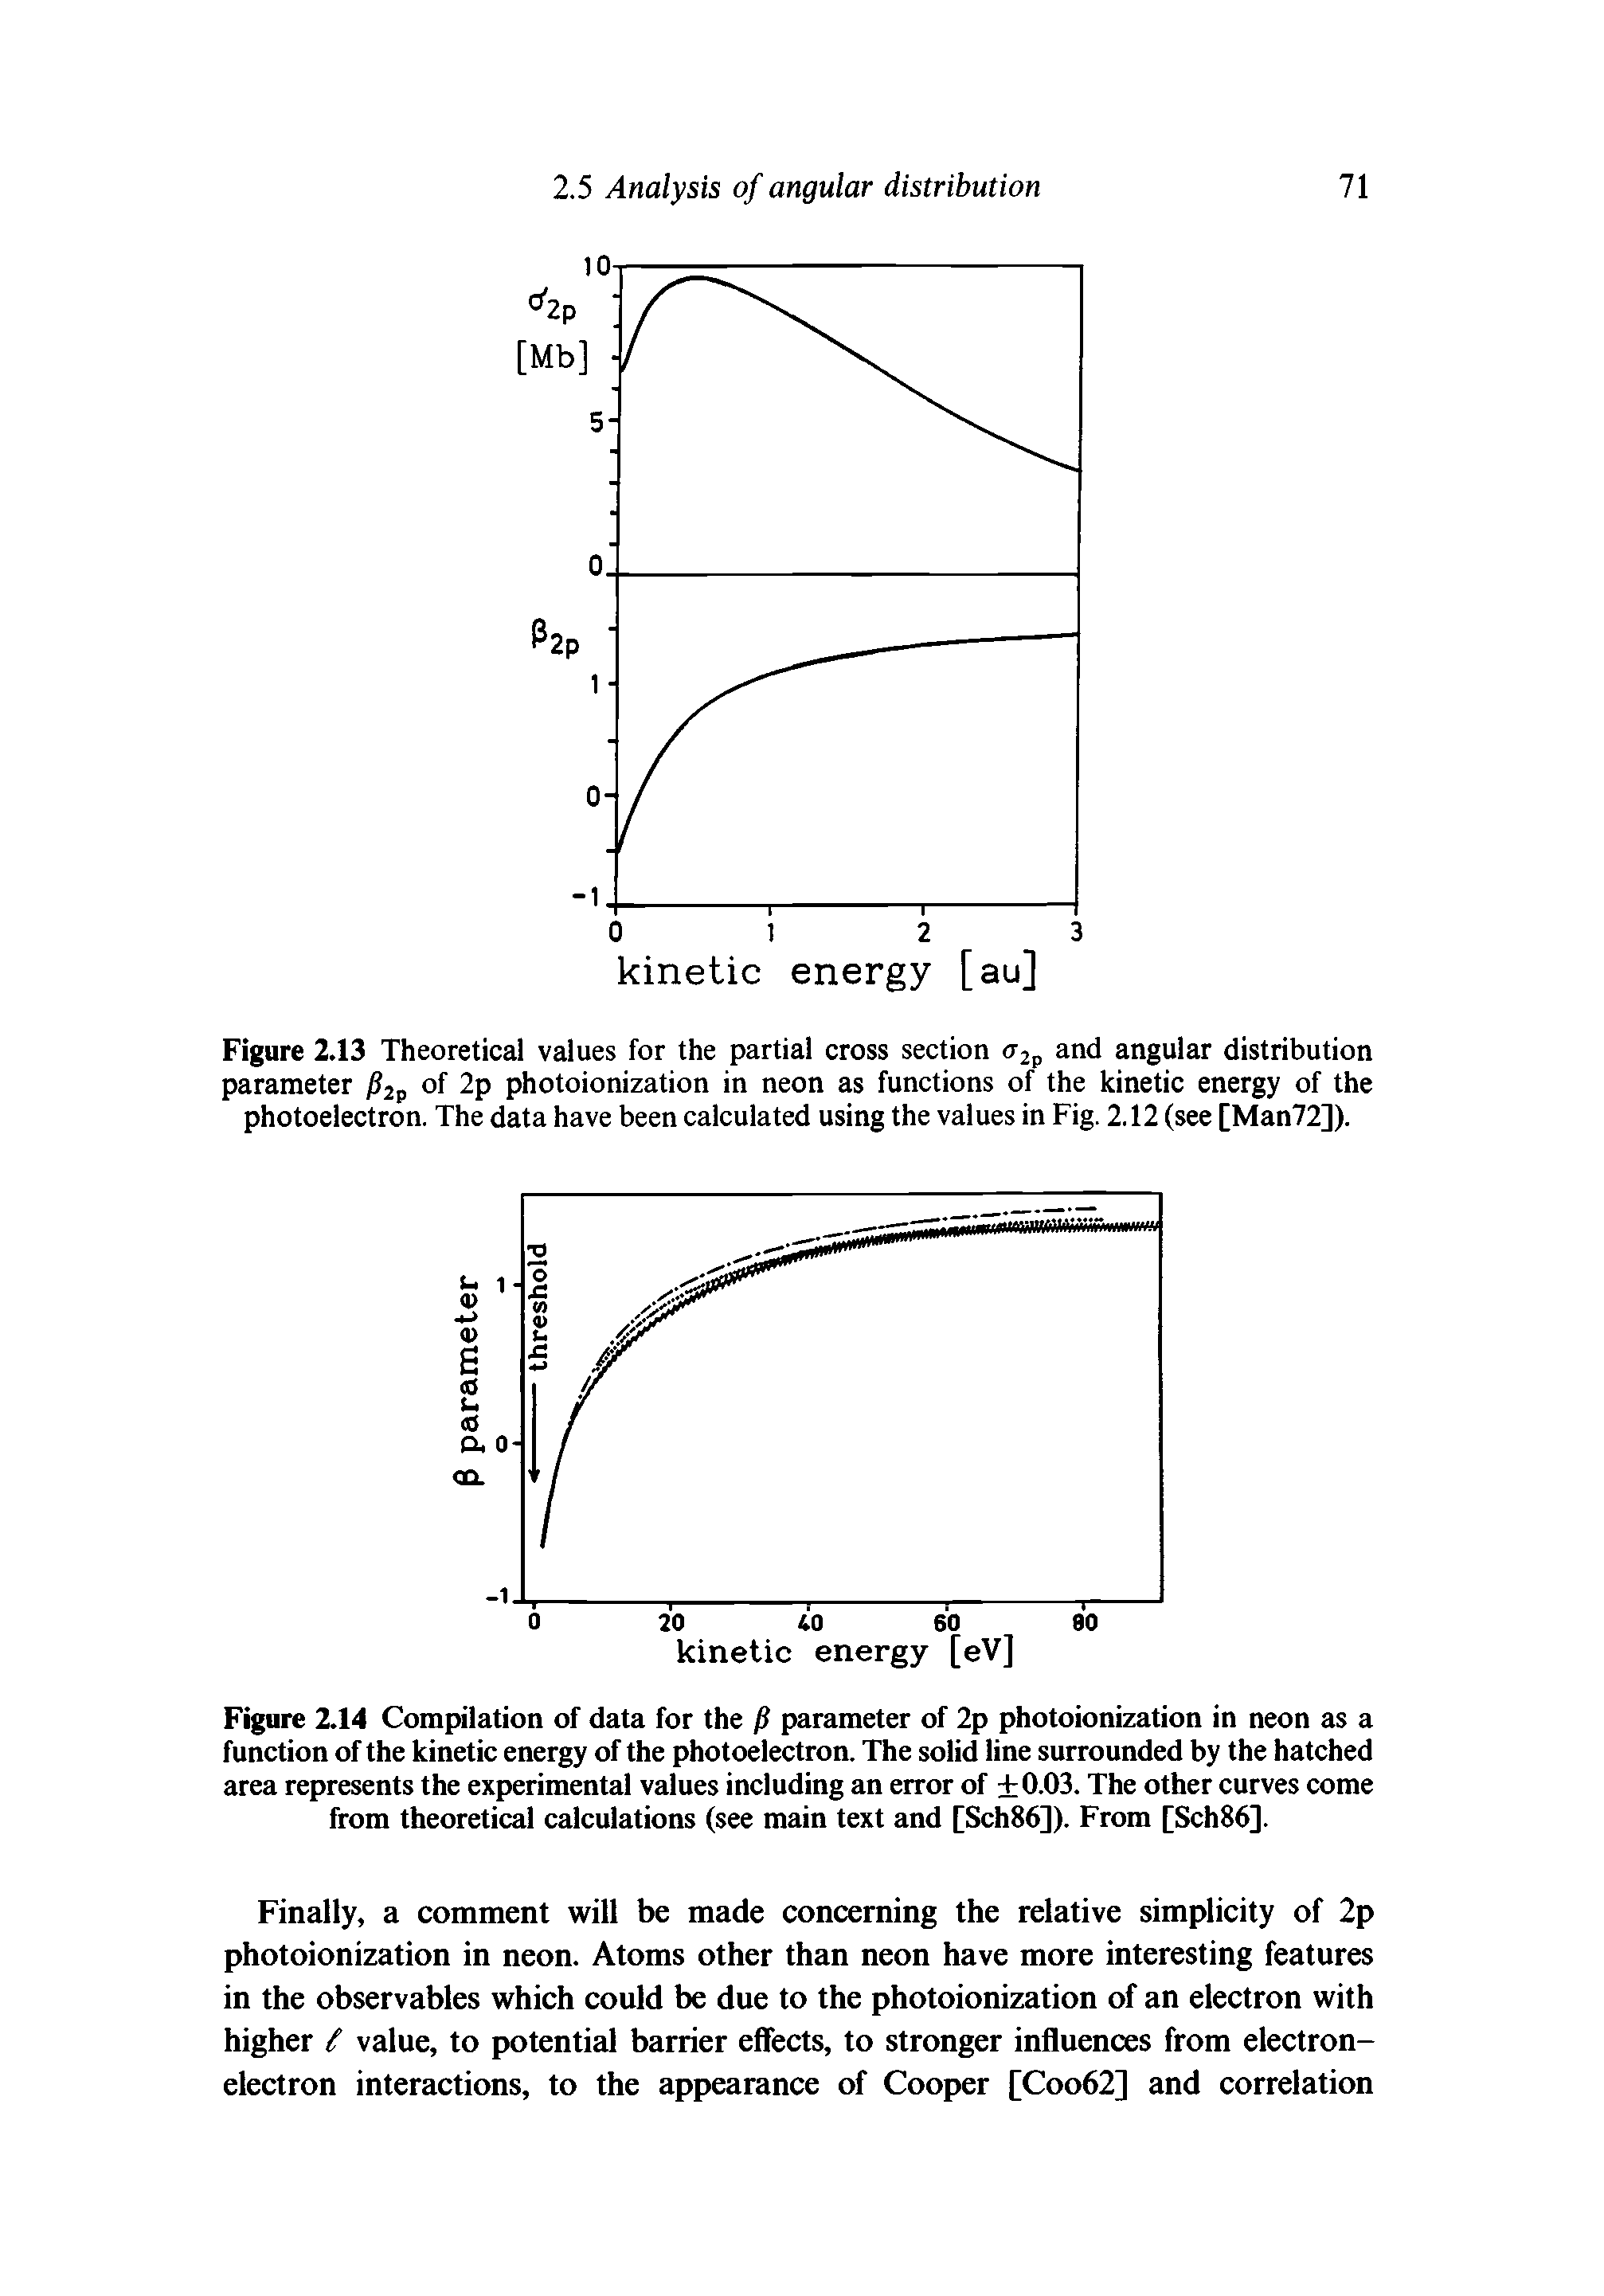 Figure 2.14 Compilation of data for the / parameter of 2p photoionization in neon as a function of the kinetic energy of the photoelectron. The solid line surrounded by the hatched area represents the experimental values including an error of +0.03. The other curves come from theoretical calculations (see main text and [Sch86]). From [Sch86].